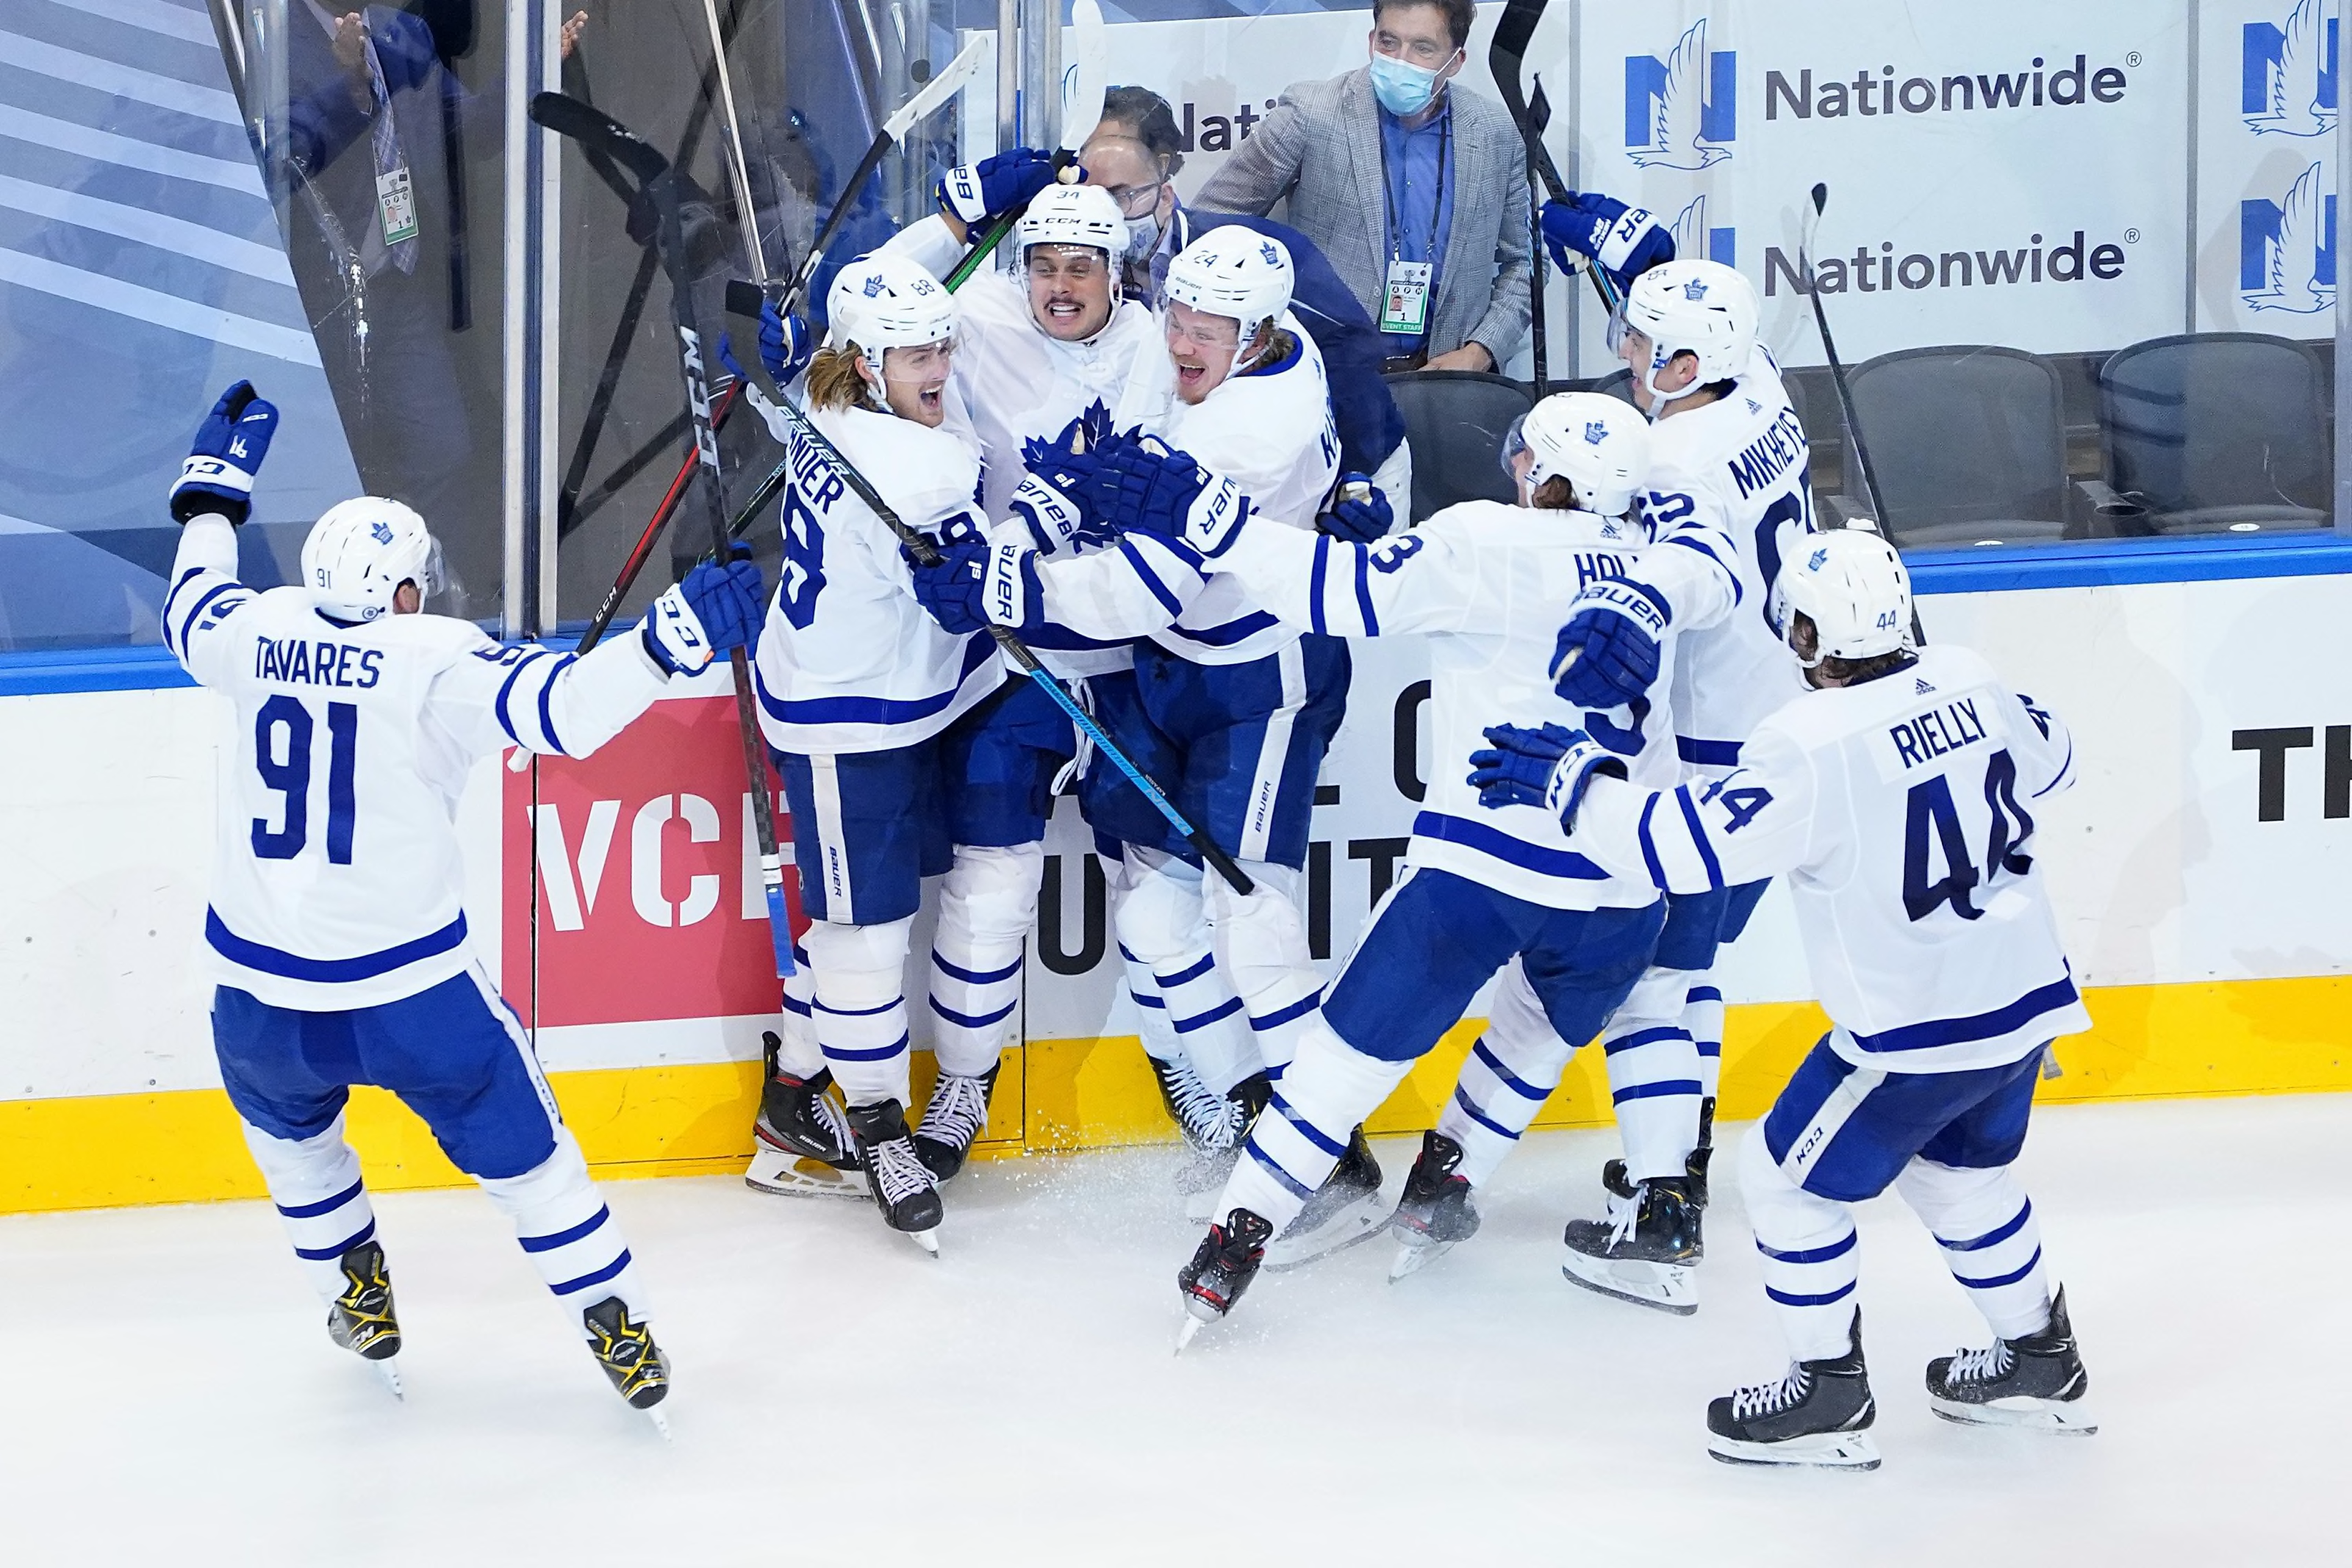 Toronto Maple Leafs 3 Takeaways From Stunning Game 4 Win Vs Columbus